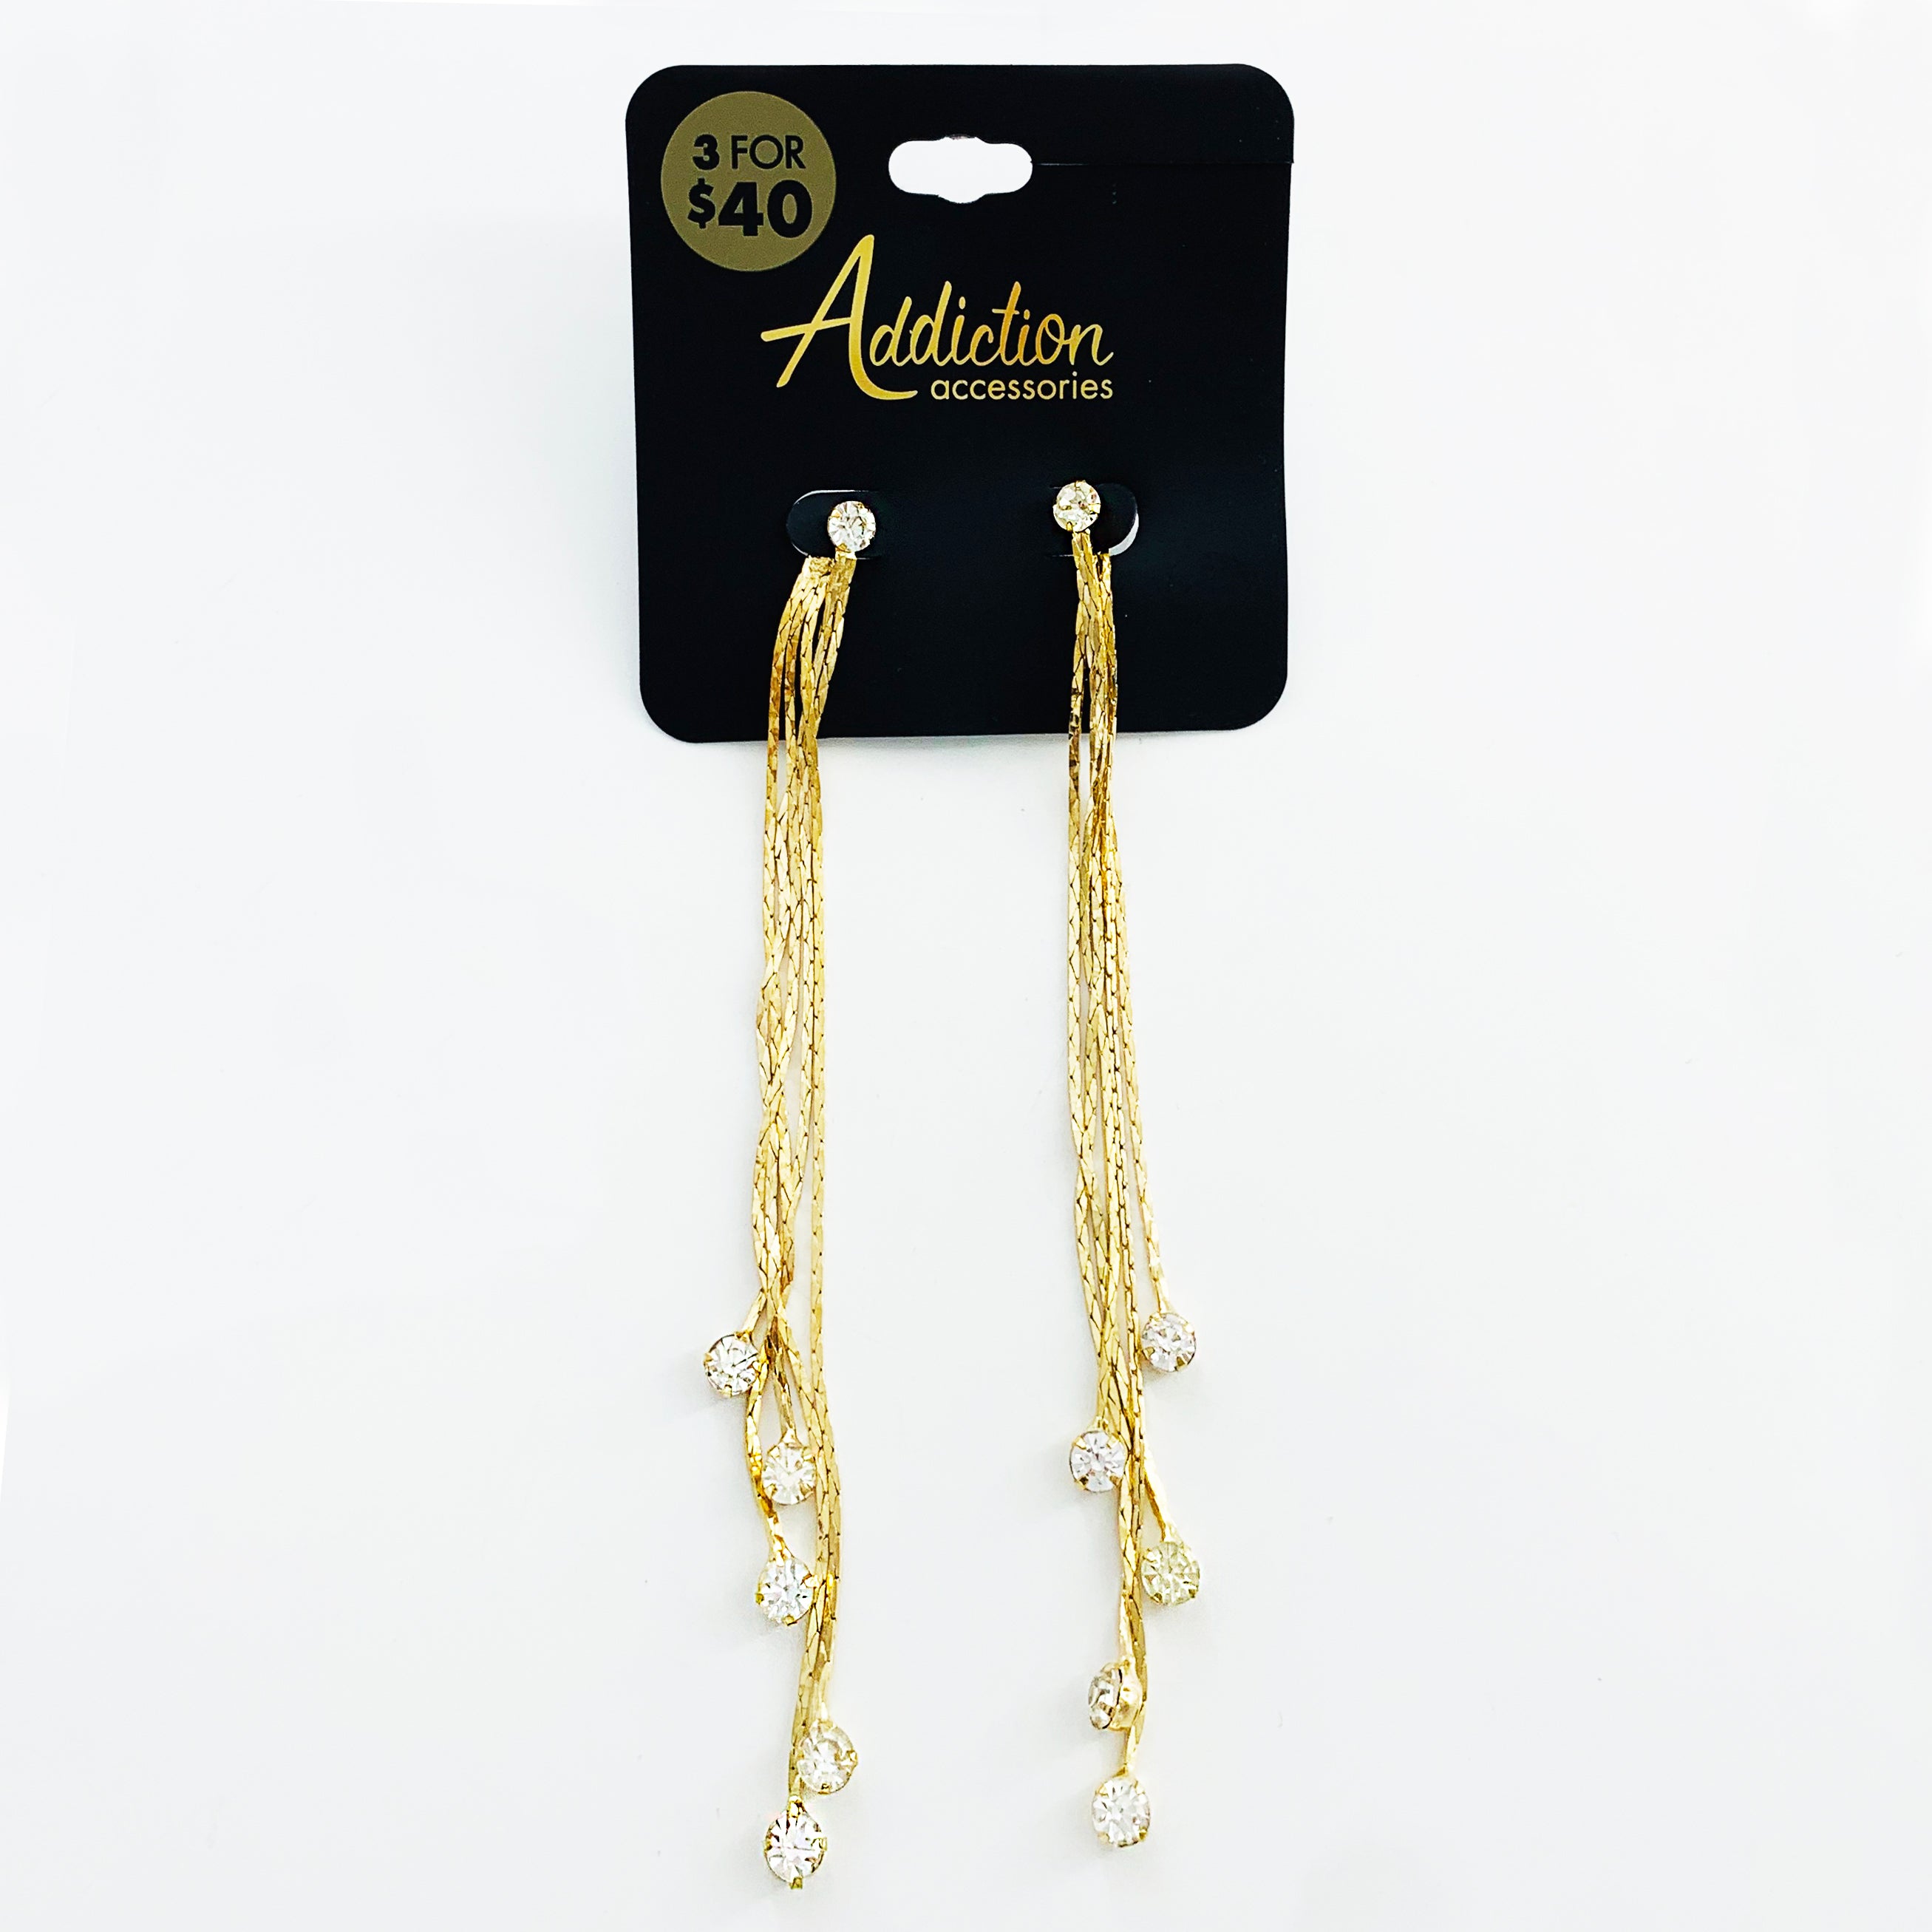 Long gold earrings with diamante tips